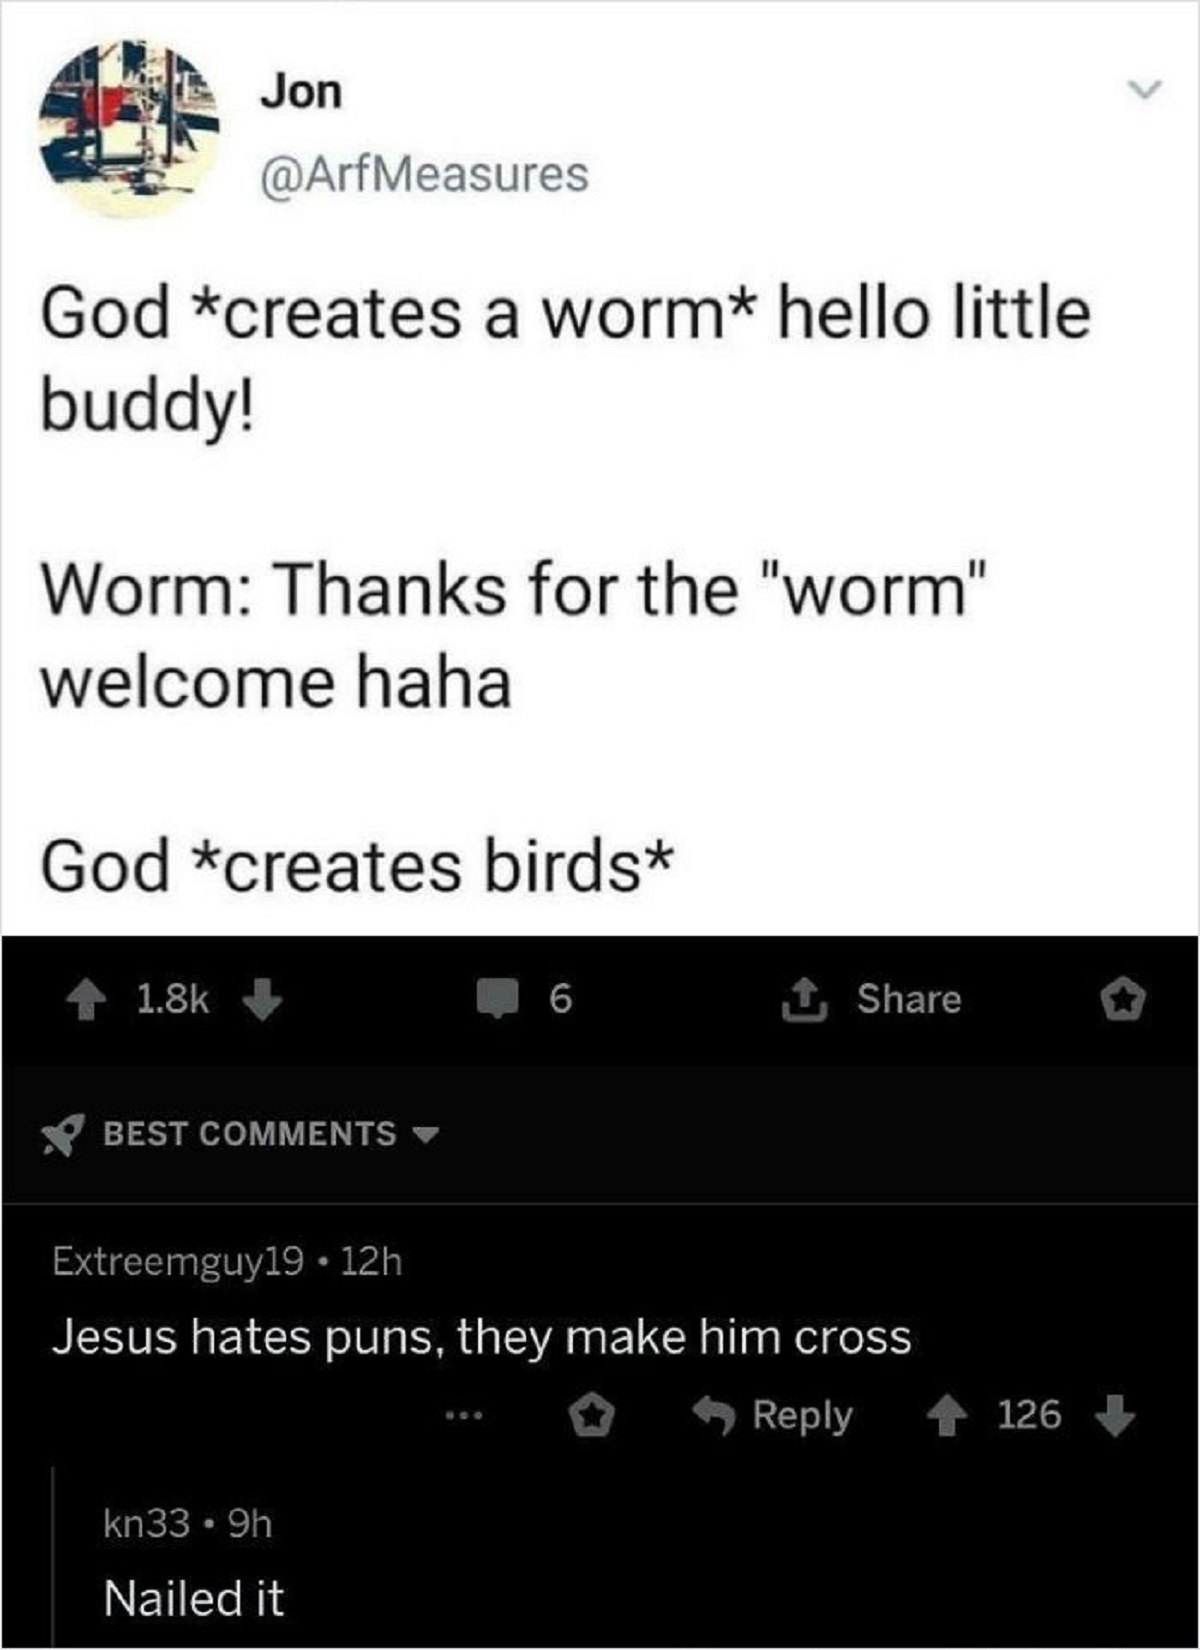 funny replies better than the original - thanks for the worm welcome - Jon God creates a worm hello little buddy! Worm Thanks for the "worm" welcome haha God creates birds Best 6 kn33 9h Nailed it Extreemguy19.12h Jesus hates puns, they make him cross 126